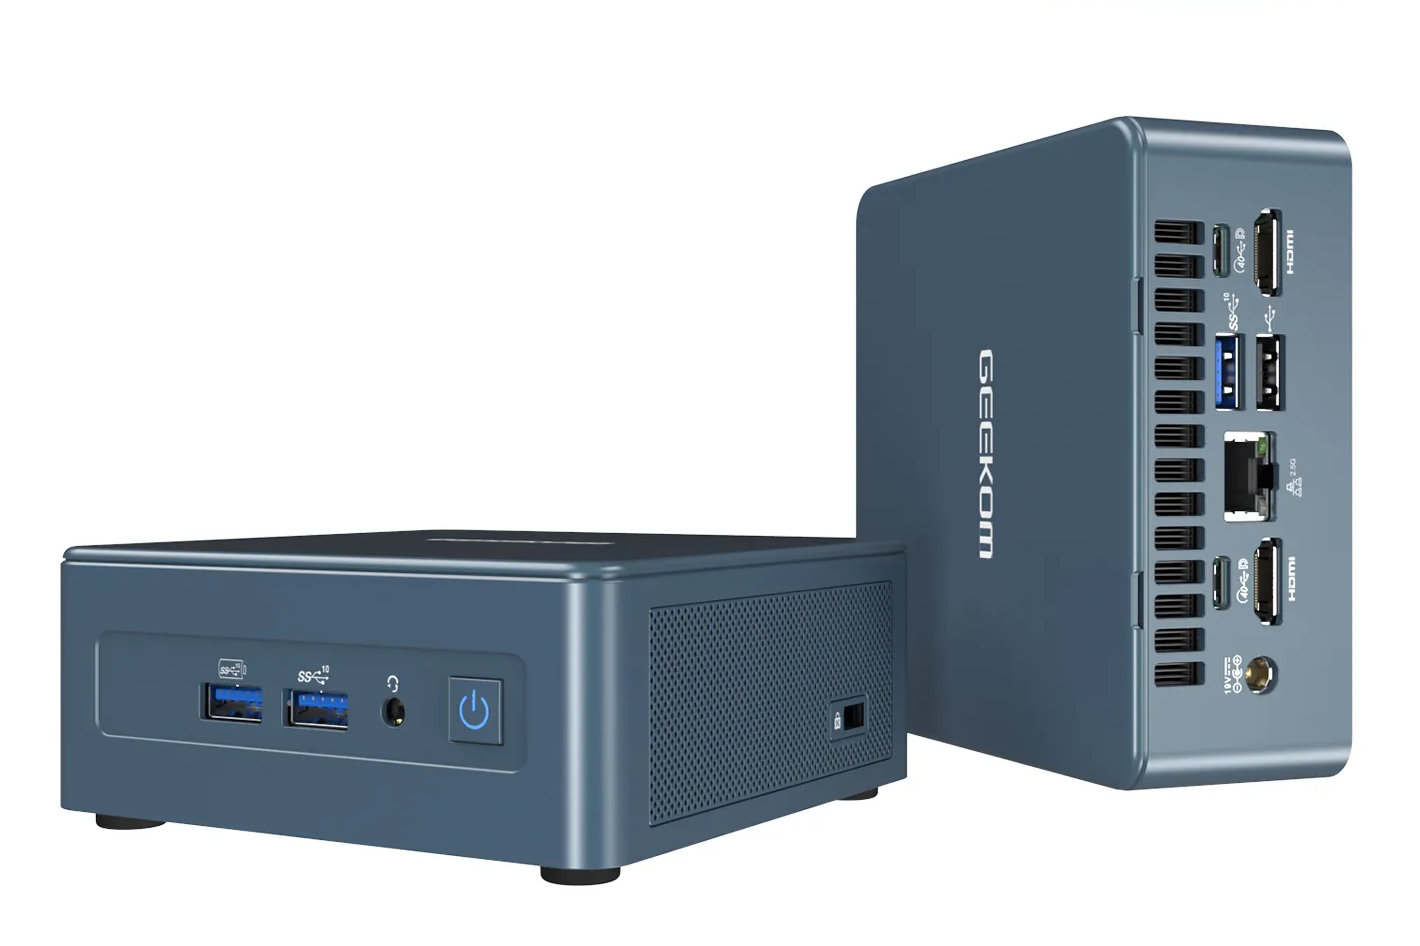 GEEKOM unveils its presence at CES 2024 with new Mini PC releases - Neowin